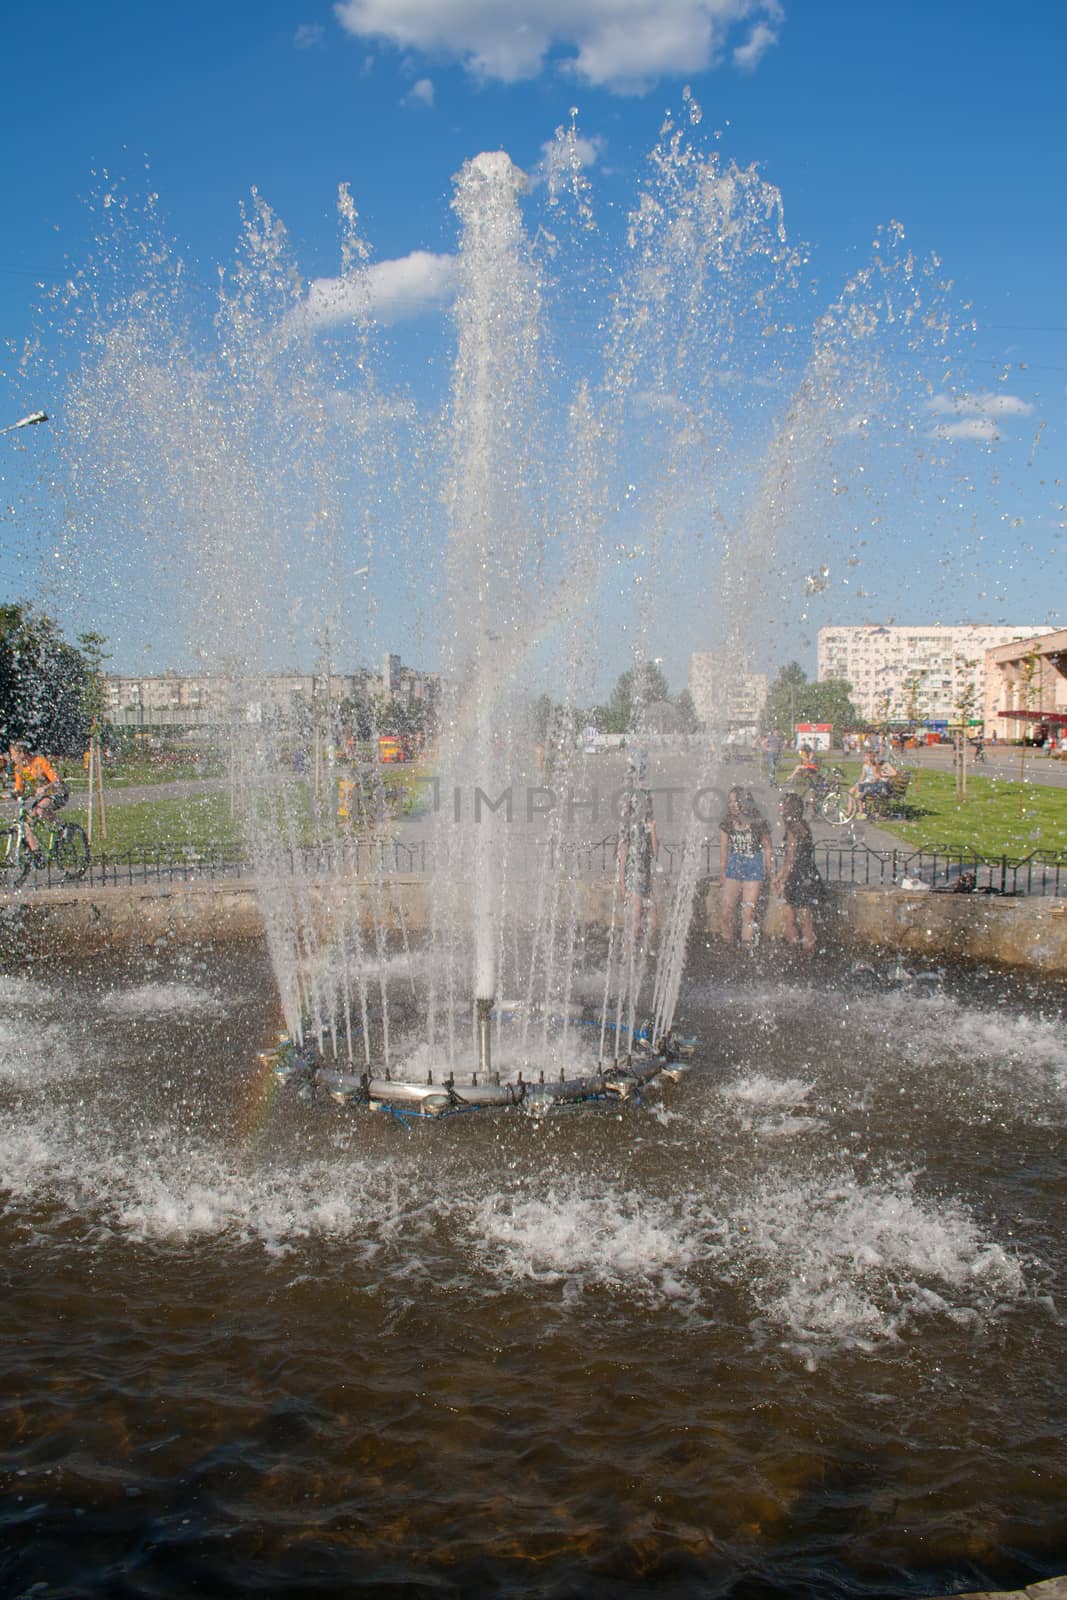 Rainbow in fountain splashes in the park